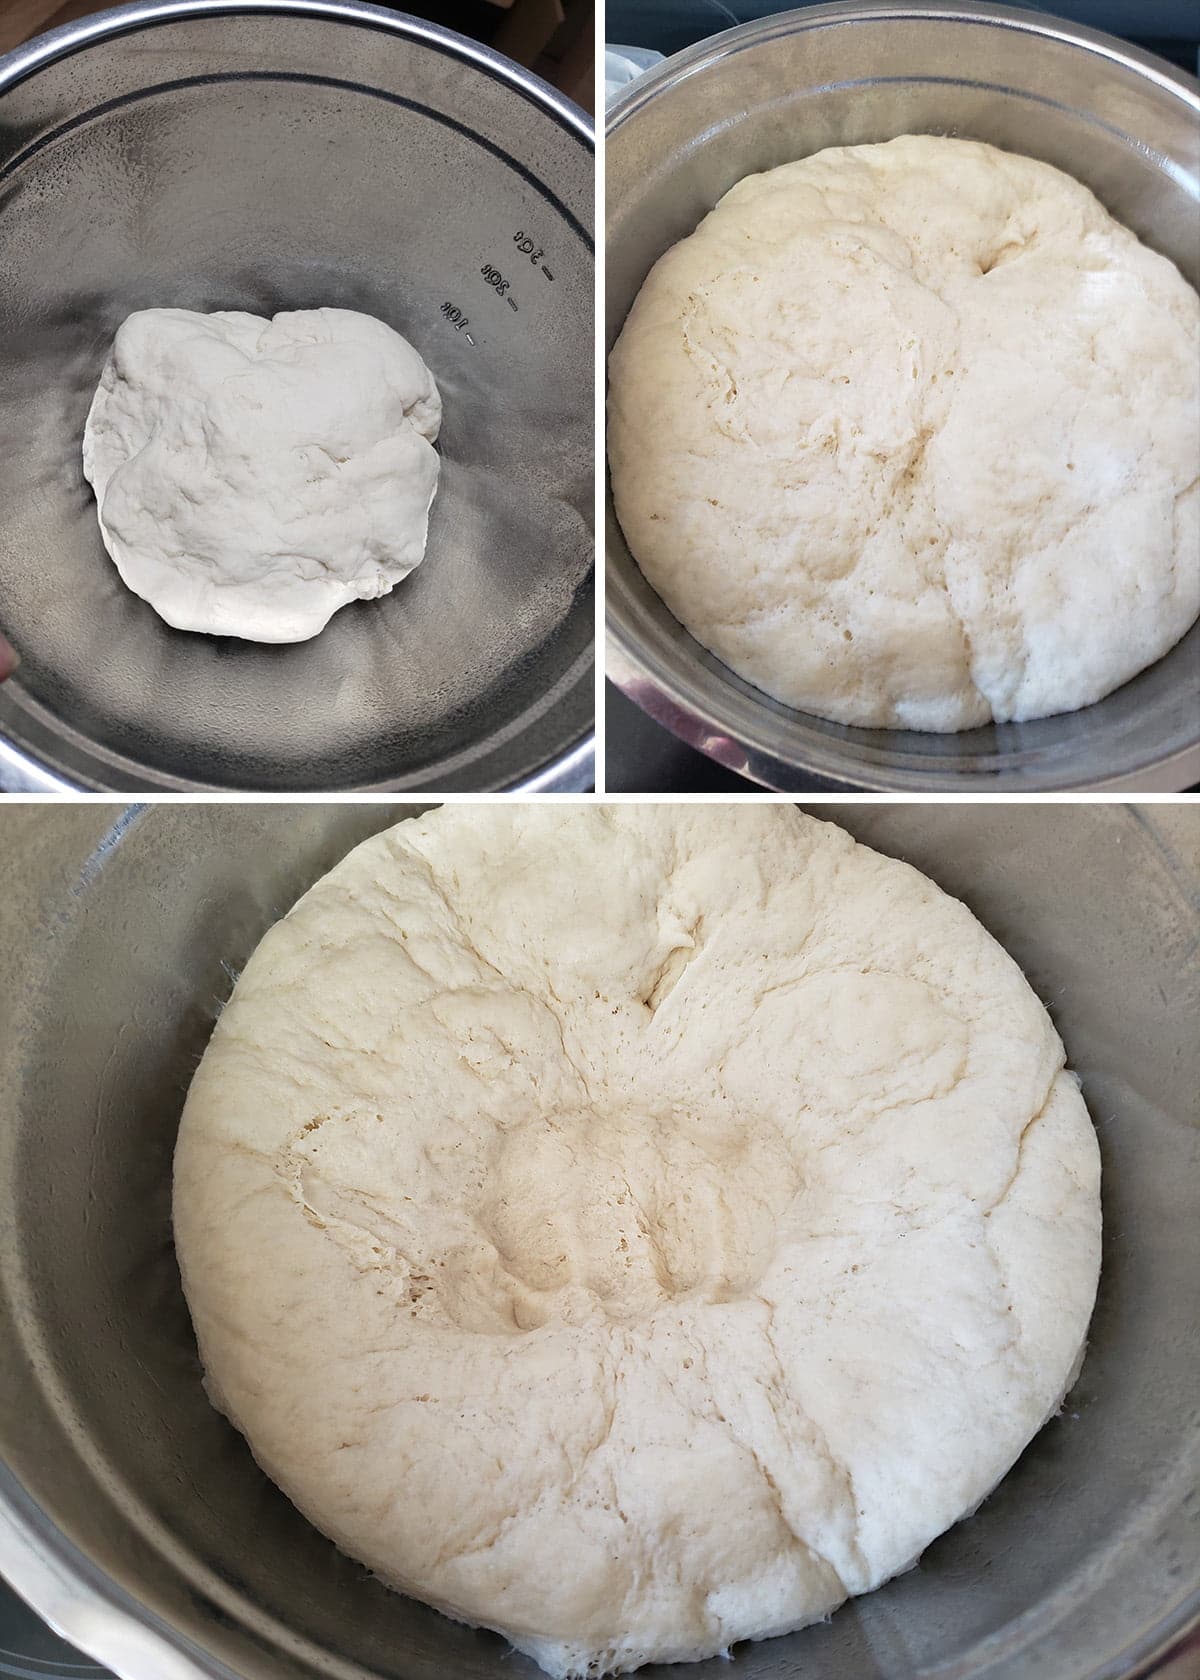 A 3 photo compilation image, showing the progression from the initial dough, the risen dough, and the punched down dough.